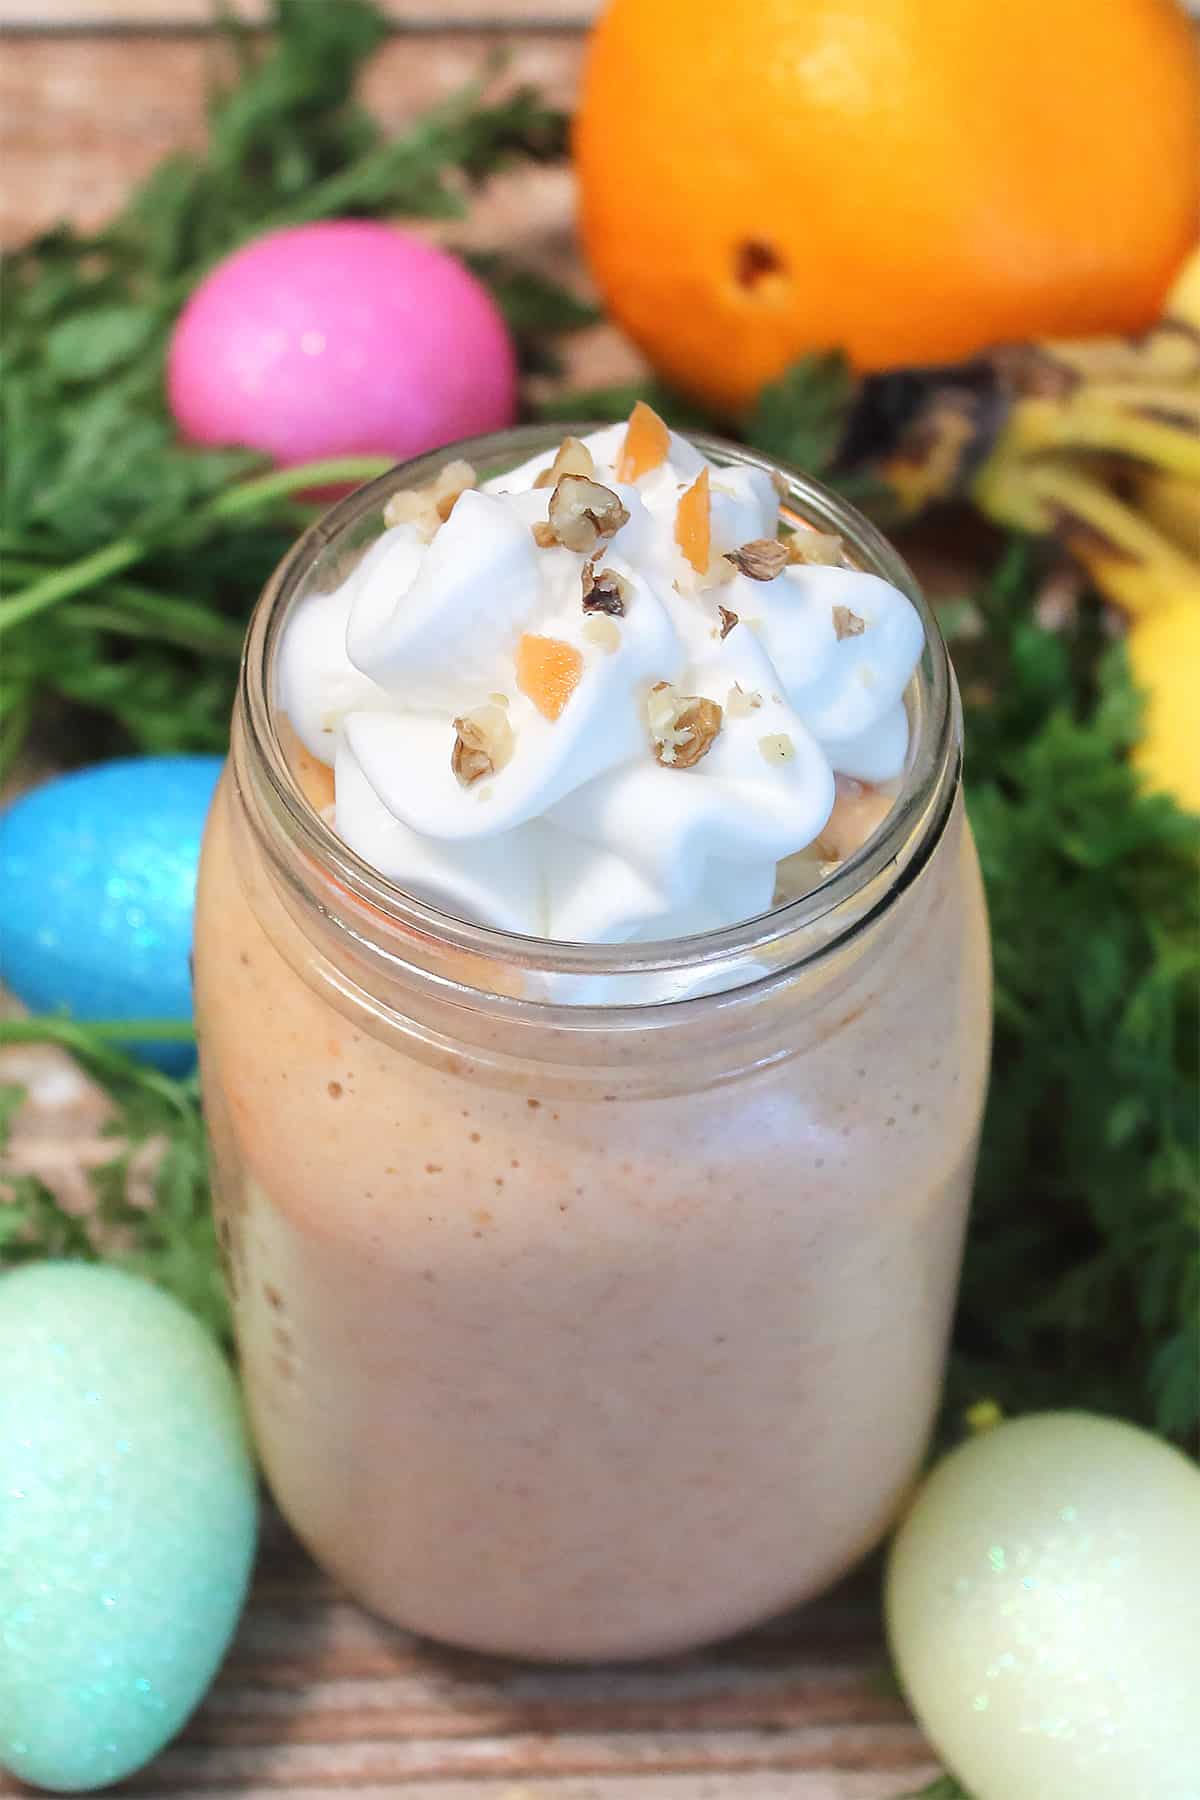 Whipped cream topped carrot cake smoothie with greens and colored eggs.